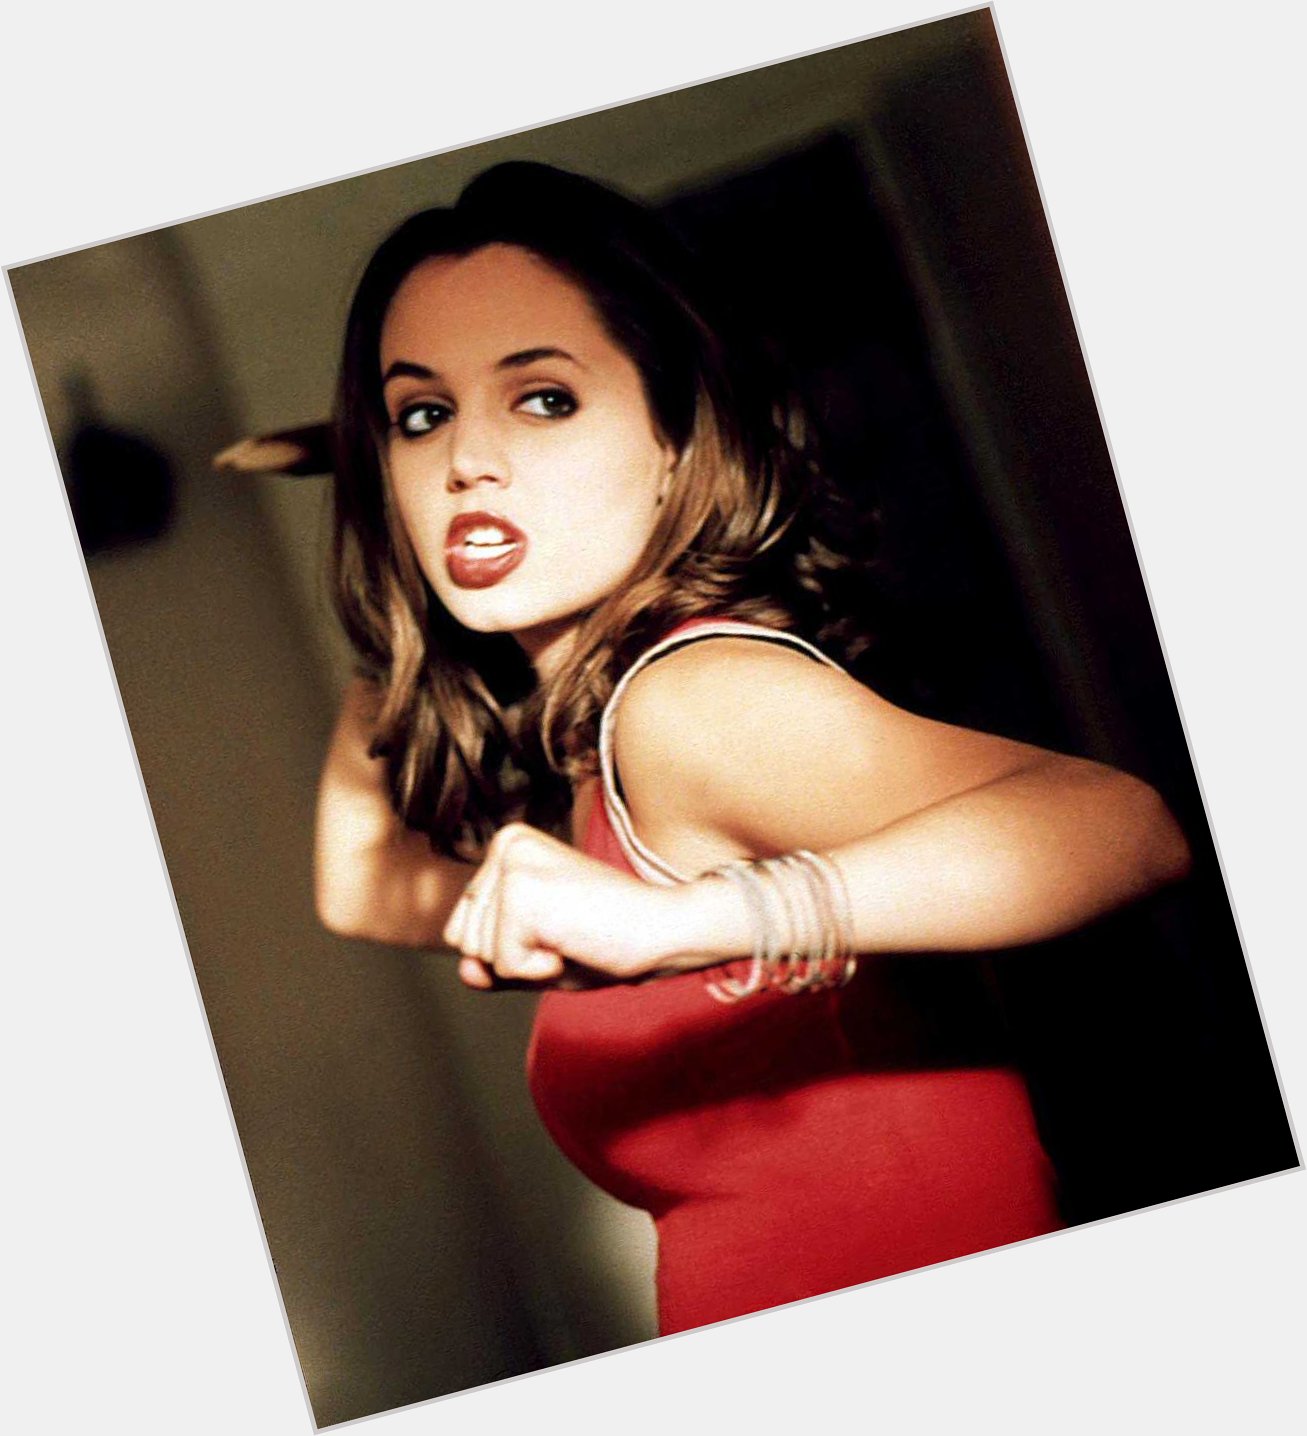 Happy 39th birthday to Eliza Dushku, star of BUFFY THE VAMPIRE SLAYER, WRONG TURN, DOLLHOUSE, and more! 